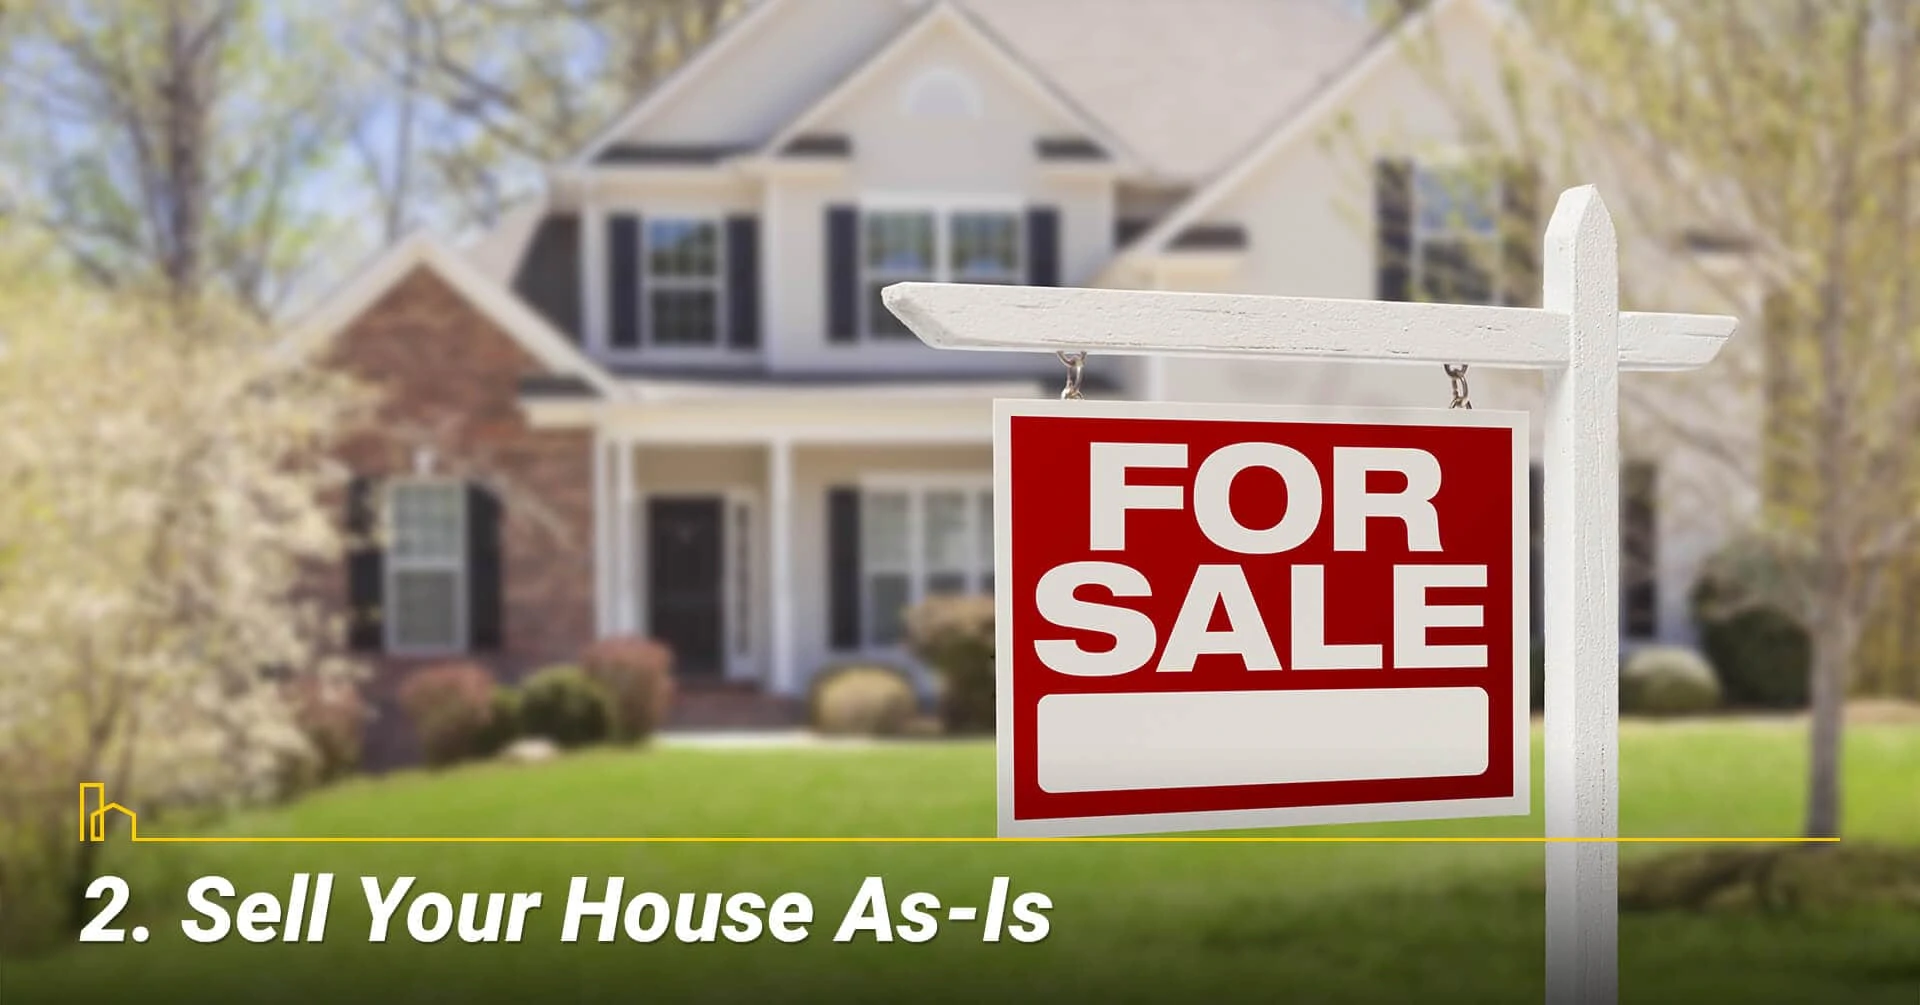 Sell Your House As-Is, sell your home in its current condition